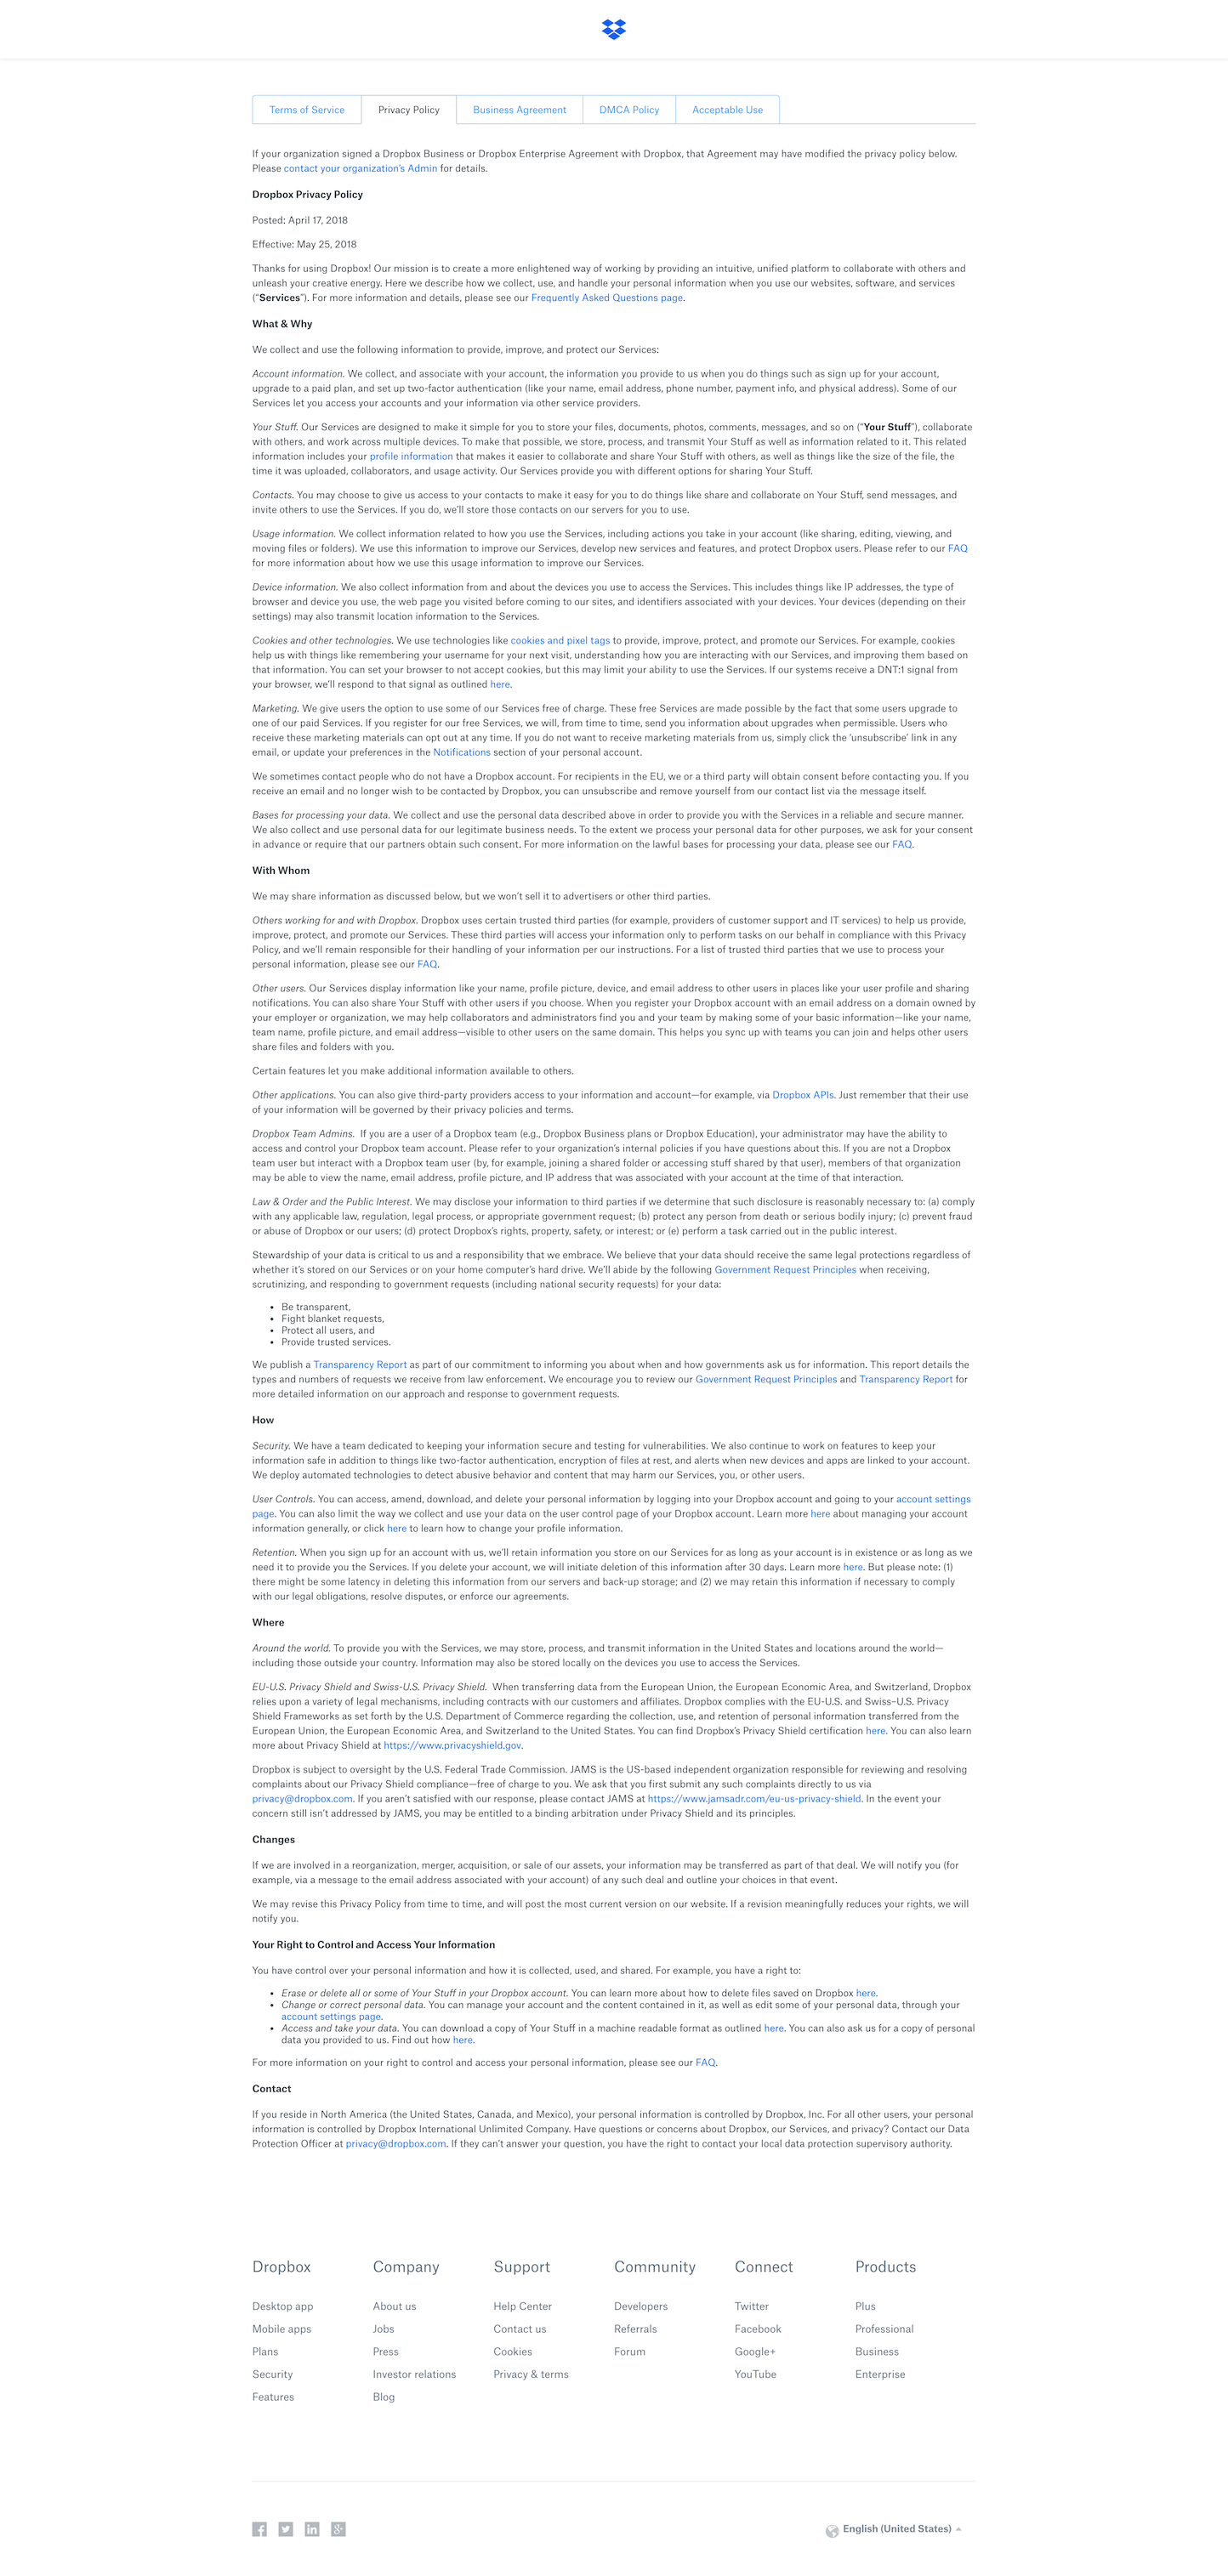 Screenshot of the Privacy Policy page from the Dropbox website.